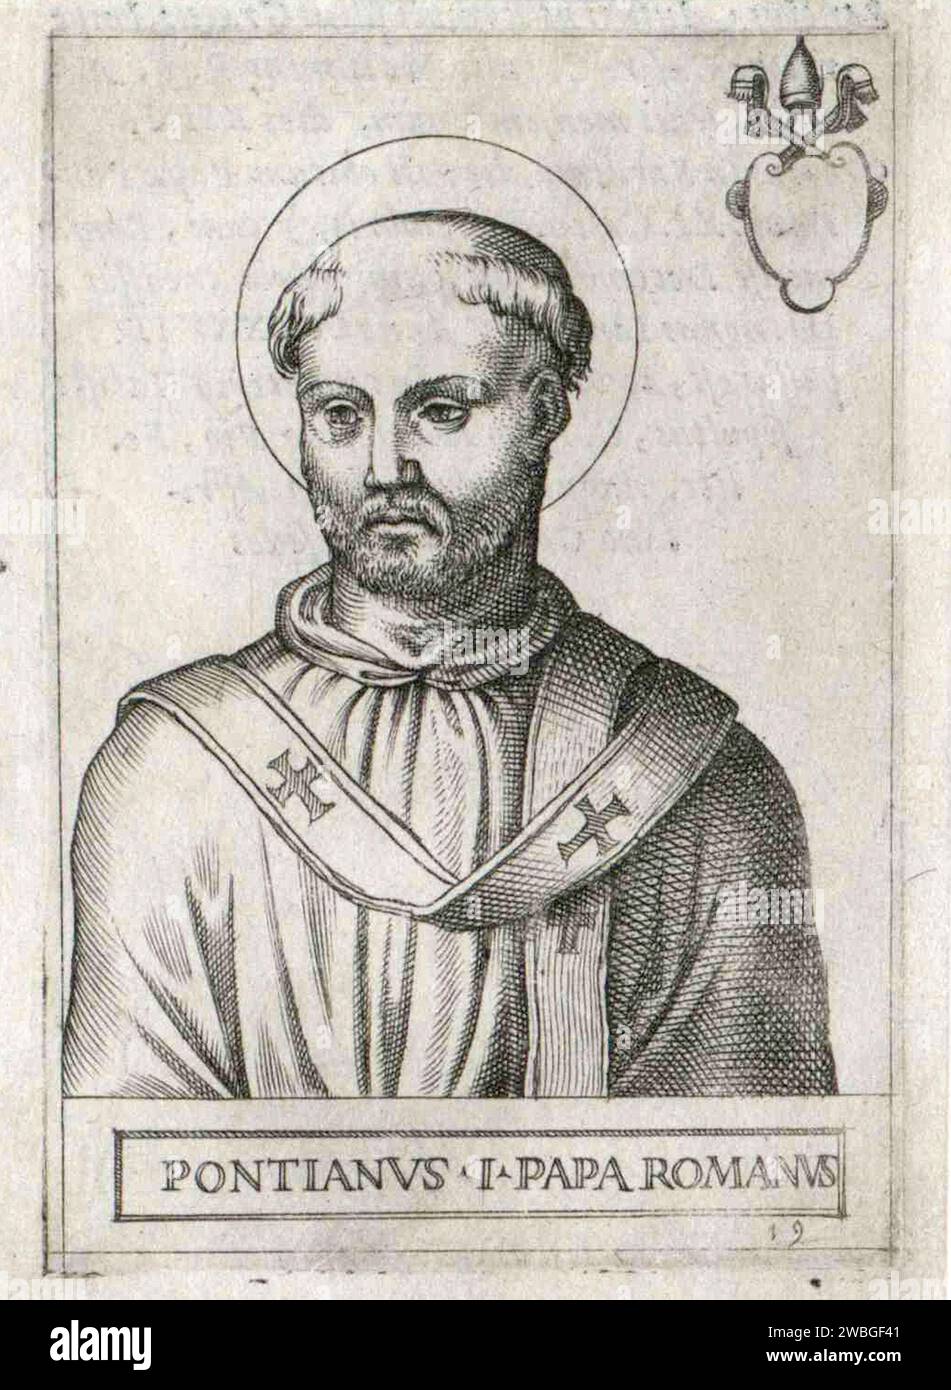 An 17th Century engraving of Pope Pontian who was pontiff from AD230 to AD235. He was the eighteenth pope and is the first to have the exact dates of his period in office recorded. He was exiled to Sardinia where he was beaten to death. Before his death he abdicated, allowing the orderly election of a successor. This abdication ended the schism between the papal office and the opposition antipope Hippolytus, who was also exiled to and died on Sardinia. Stock Photo